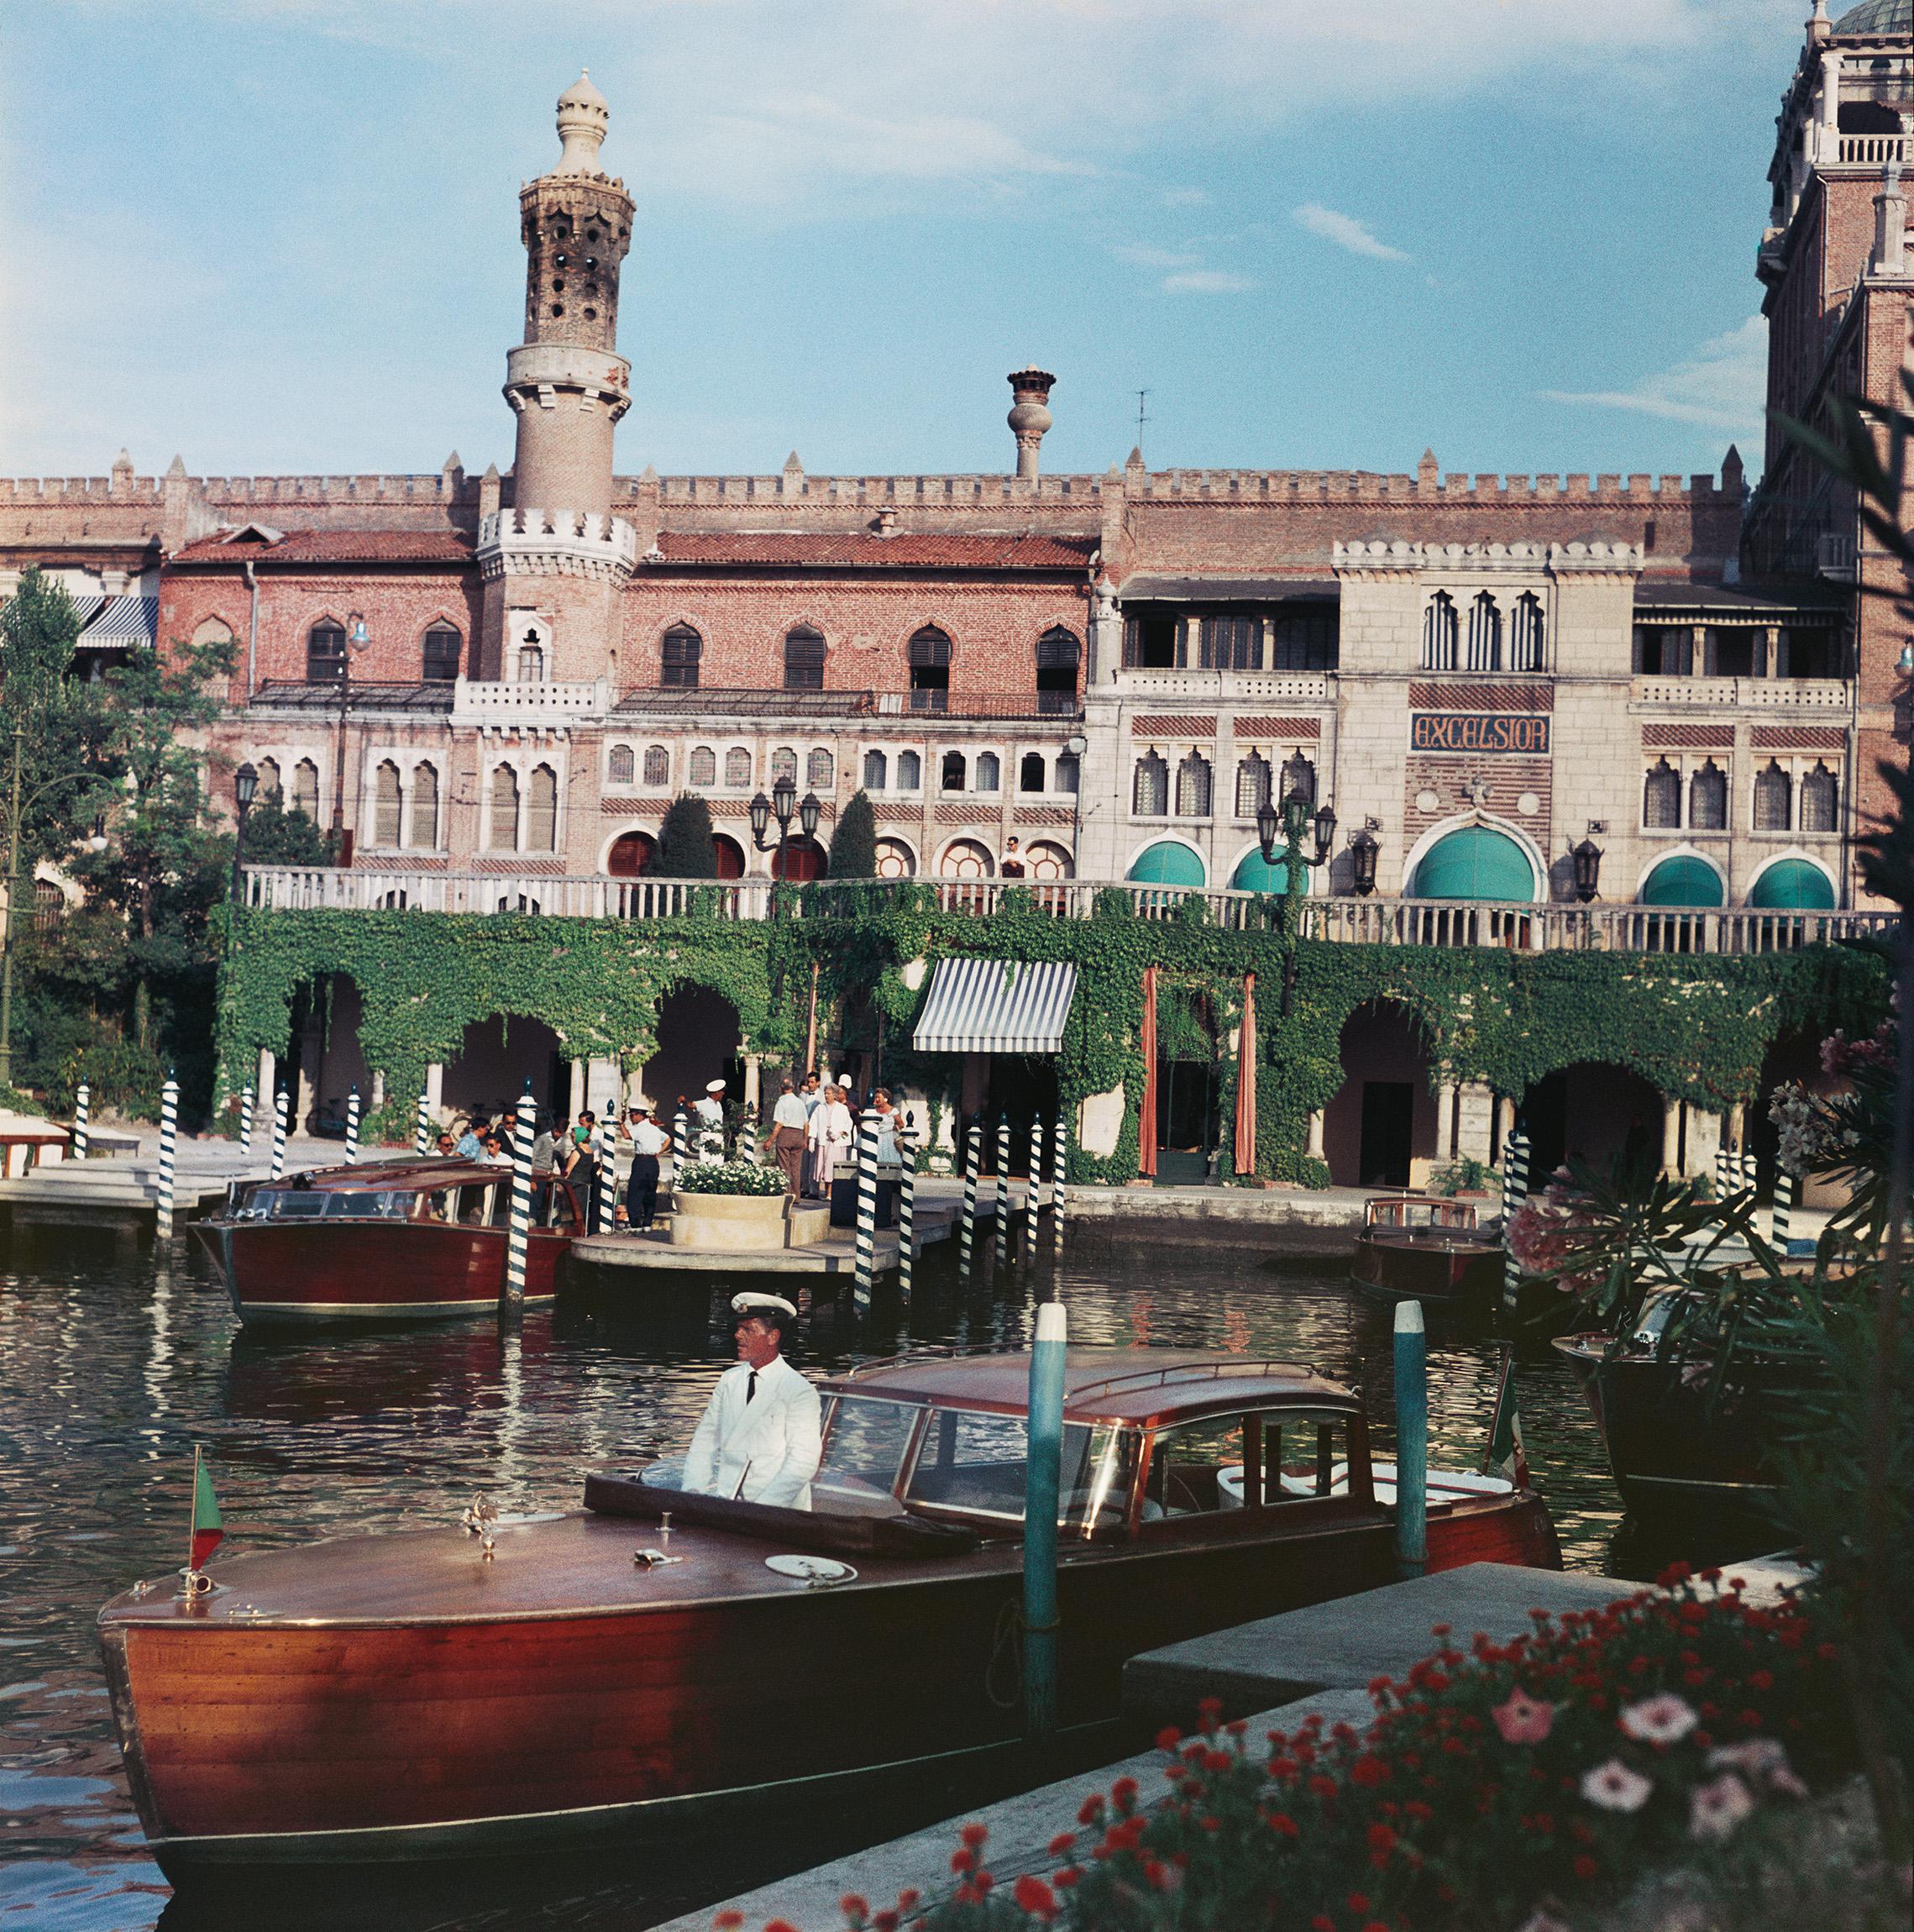 Westin Excelsior in Venice
1957
C print
Estate stamped and hand numbered edition of 150 with certificate of authenticity from the estate.   

Slim Aarons, an acclaimed fine art photographer, is synonymous with images that capture the luxury,